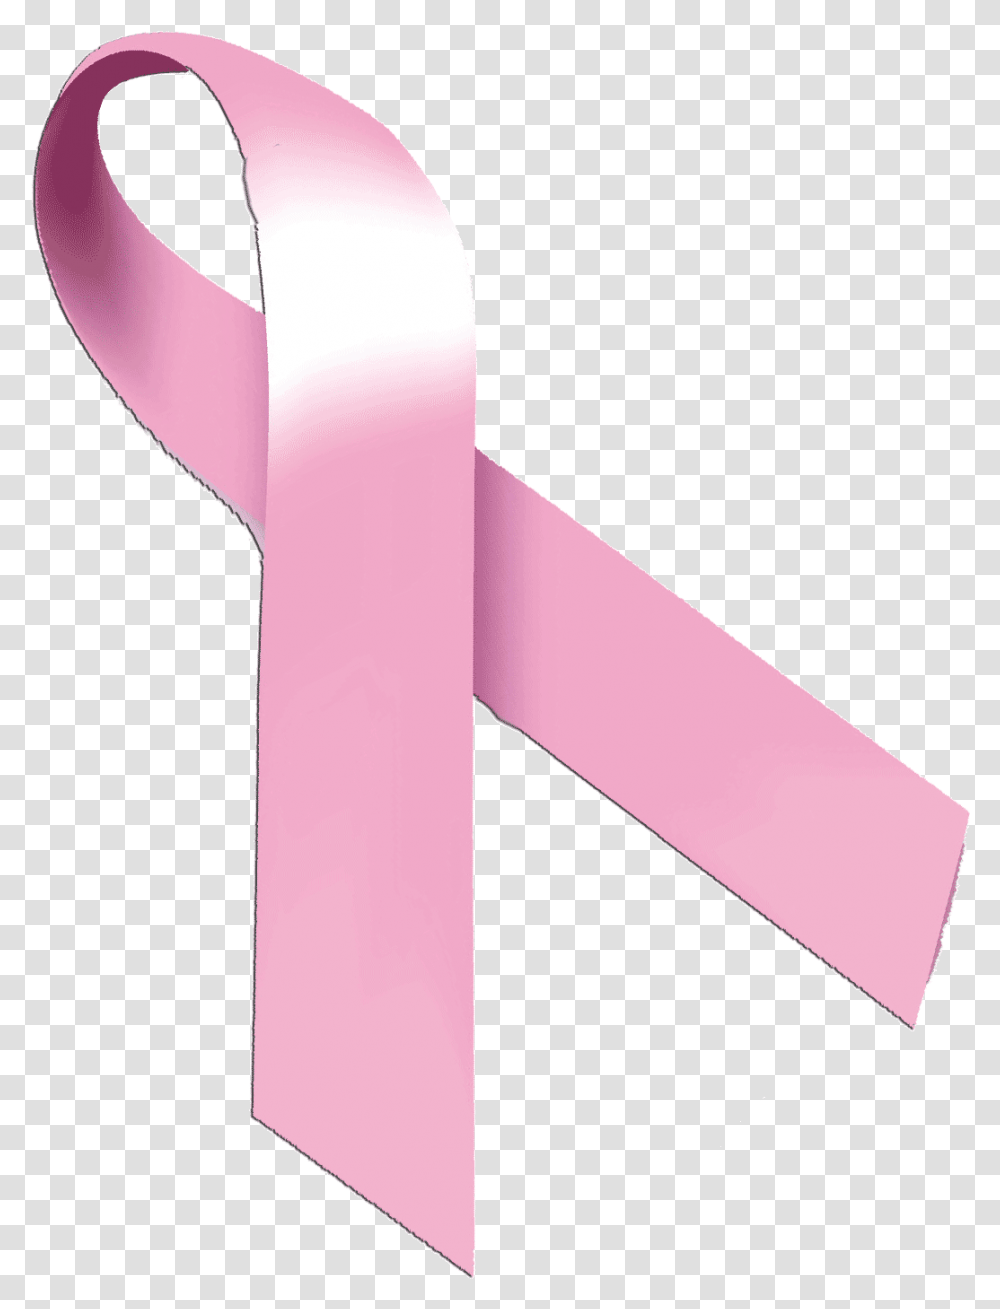 Pink Ribbon Background Image Background Breast Cancer Ribbon, Tie, Accessories, Accessory, Necktie Transparent Png